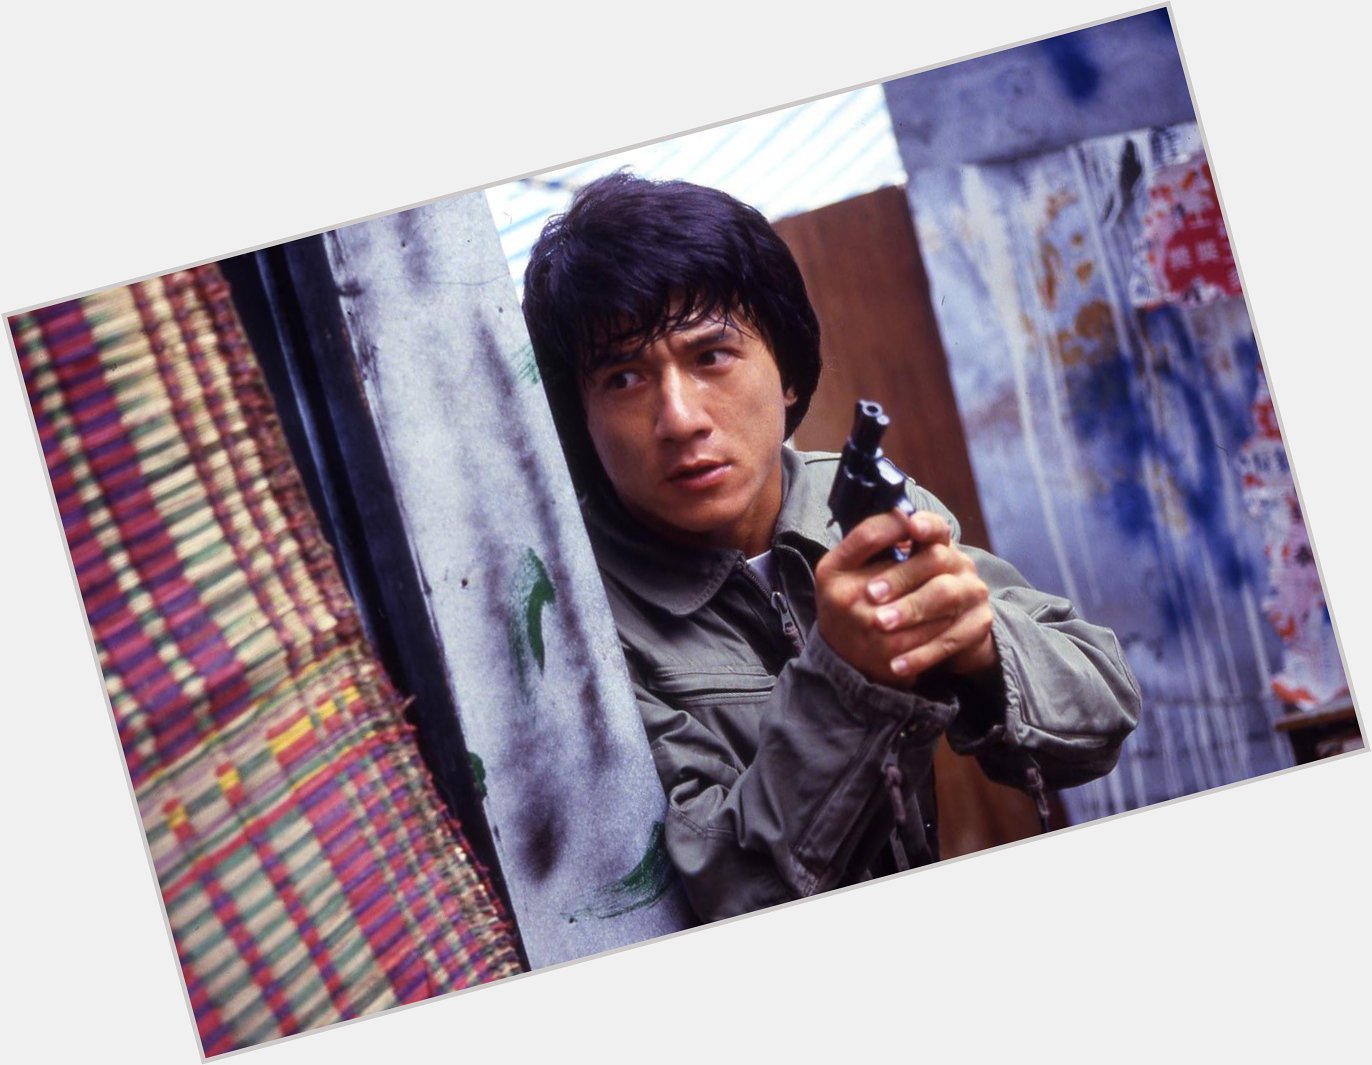 Happy birthday Jackie Chan! Coolest of the cool. Celebrate by watching Drunken Master or Police Story tonight! 